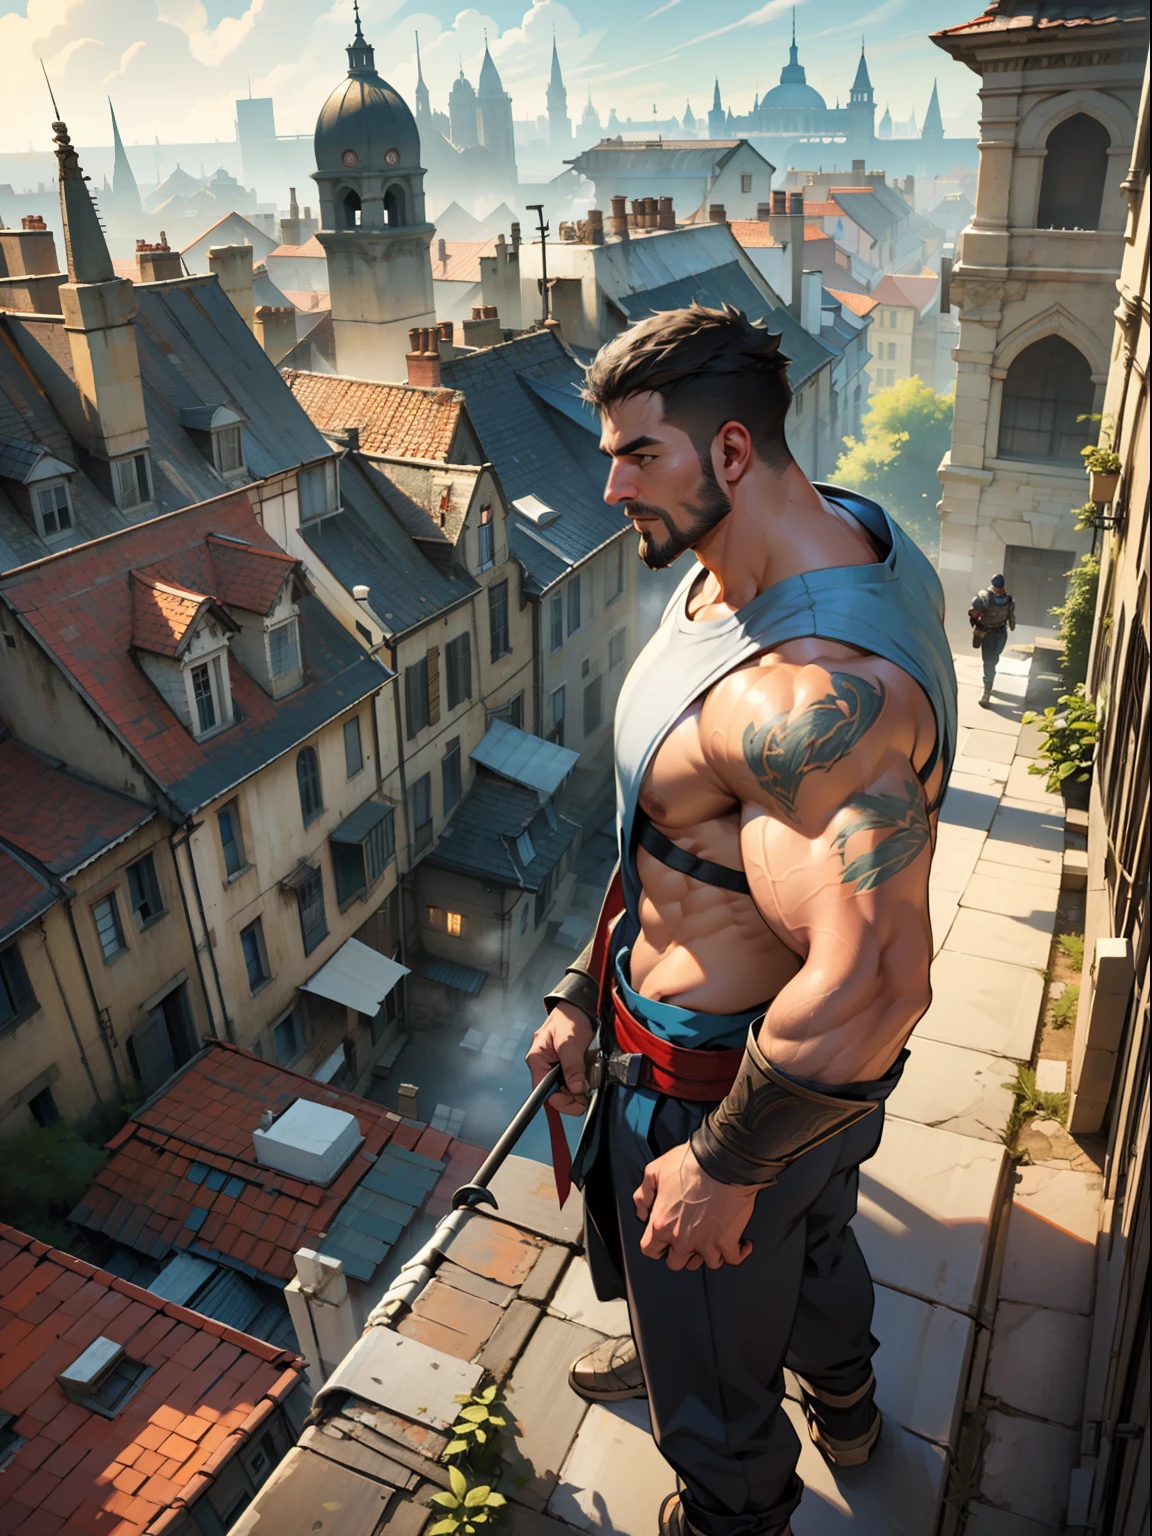 30 years old, male, assassin's creed, standing on top of a roof, panoramic view of the city, stubble, huge muscles, mature man, muscle swelling, bodybuilding, chest muscles, abs, natural light, 1man, steam punk, the dark ages, ancient European city